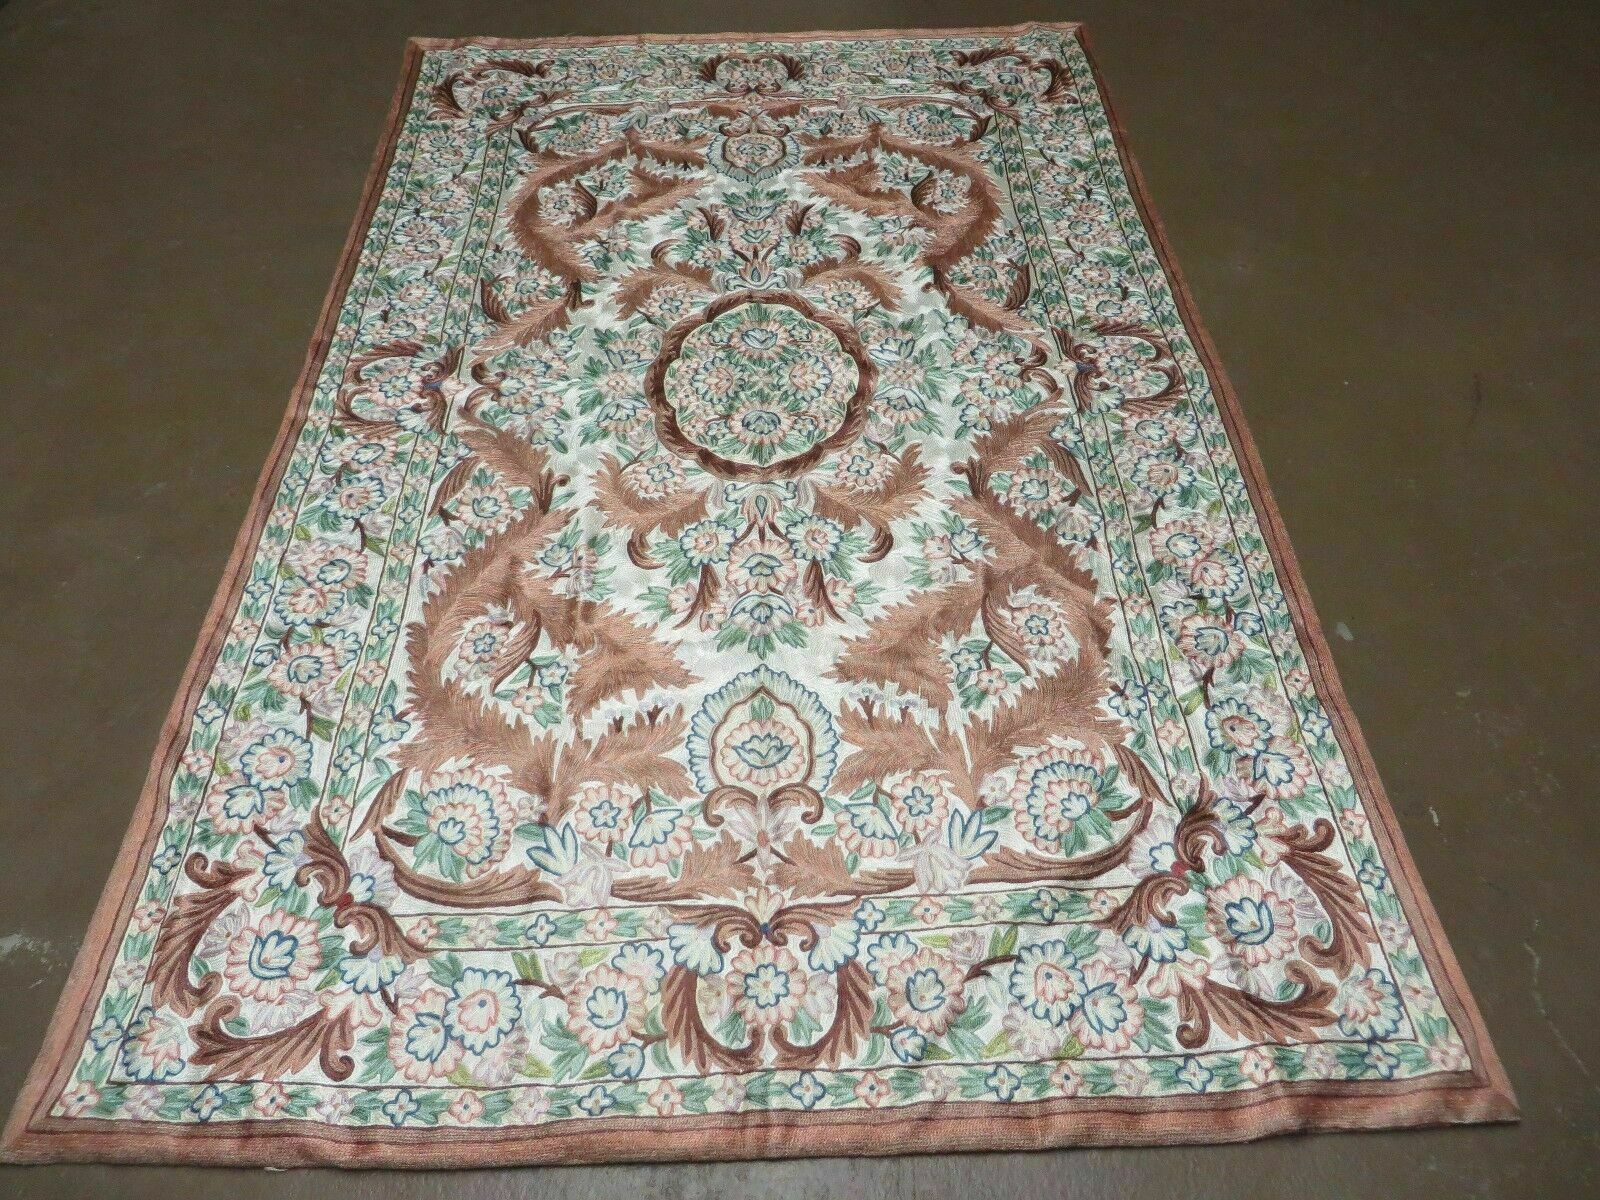 4' X 6' Vintage Embroidery Hand Stitched Rug Silk On Cotton India Backing Nice